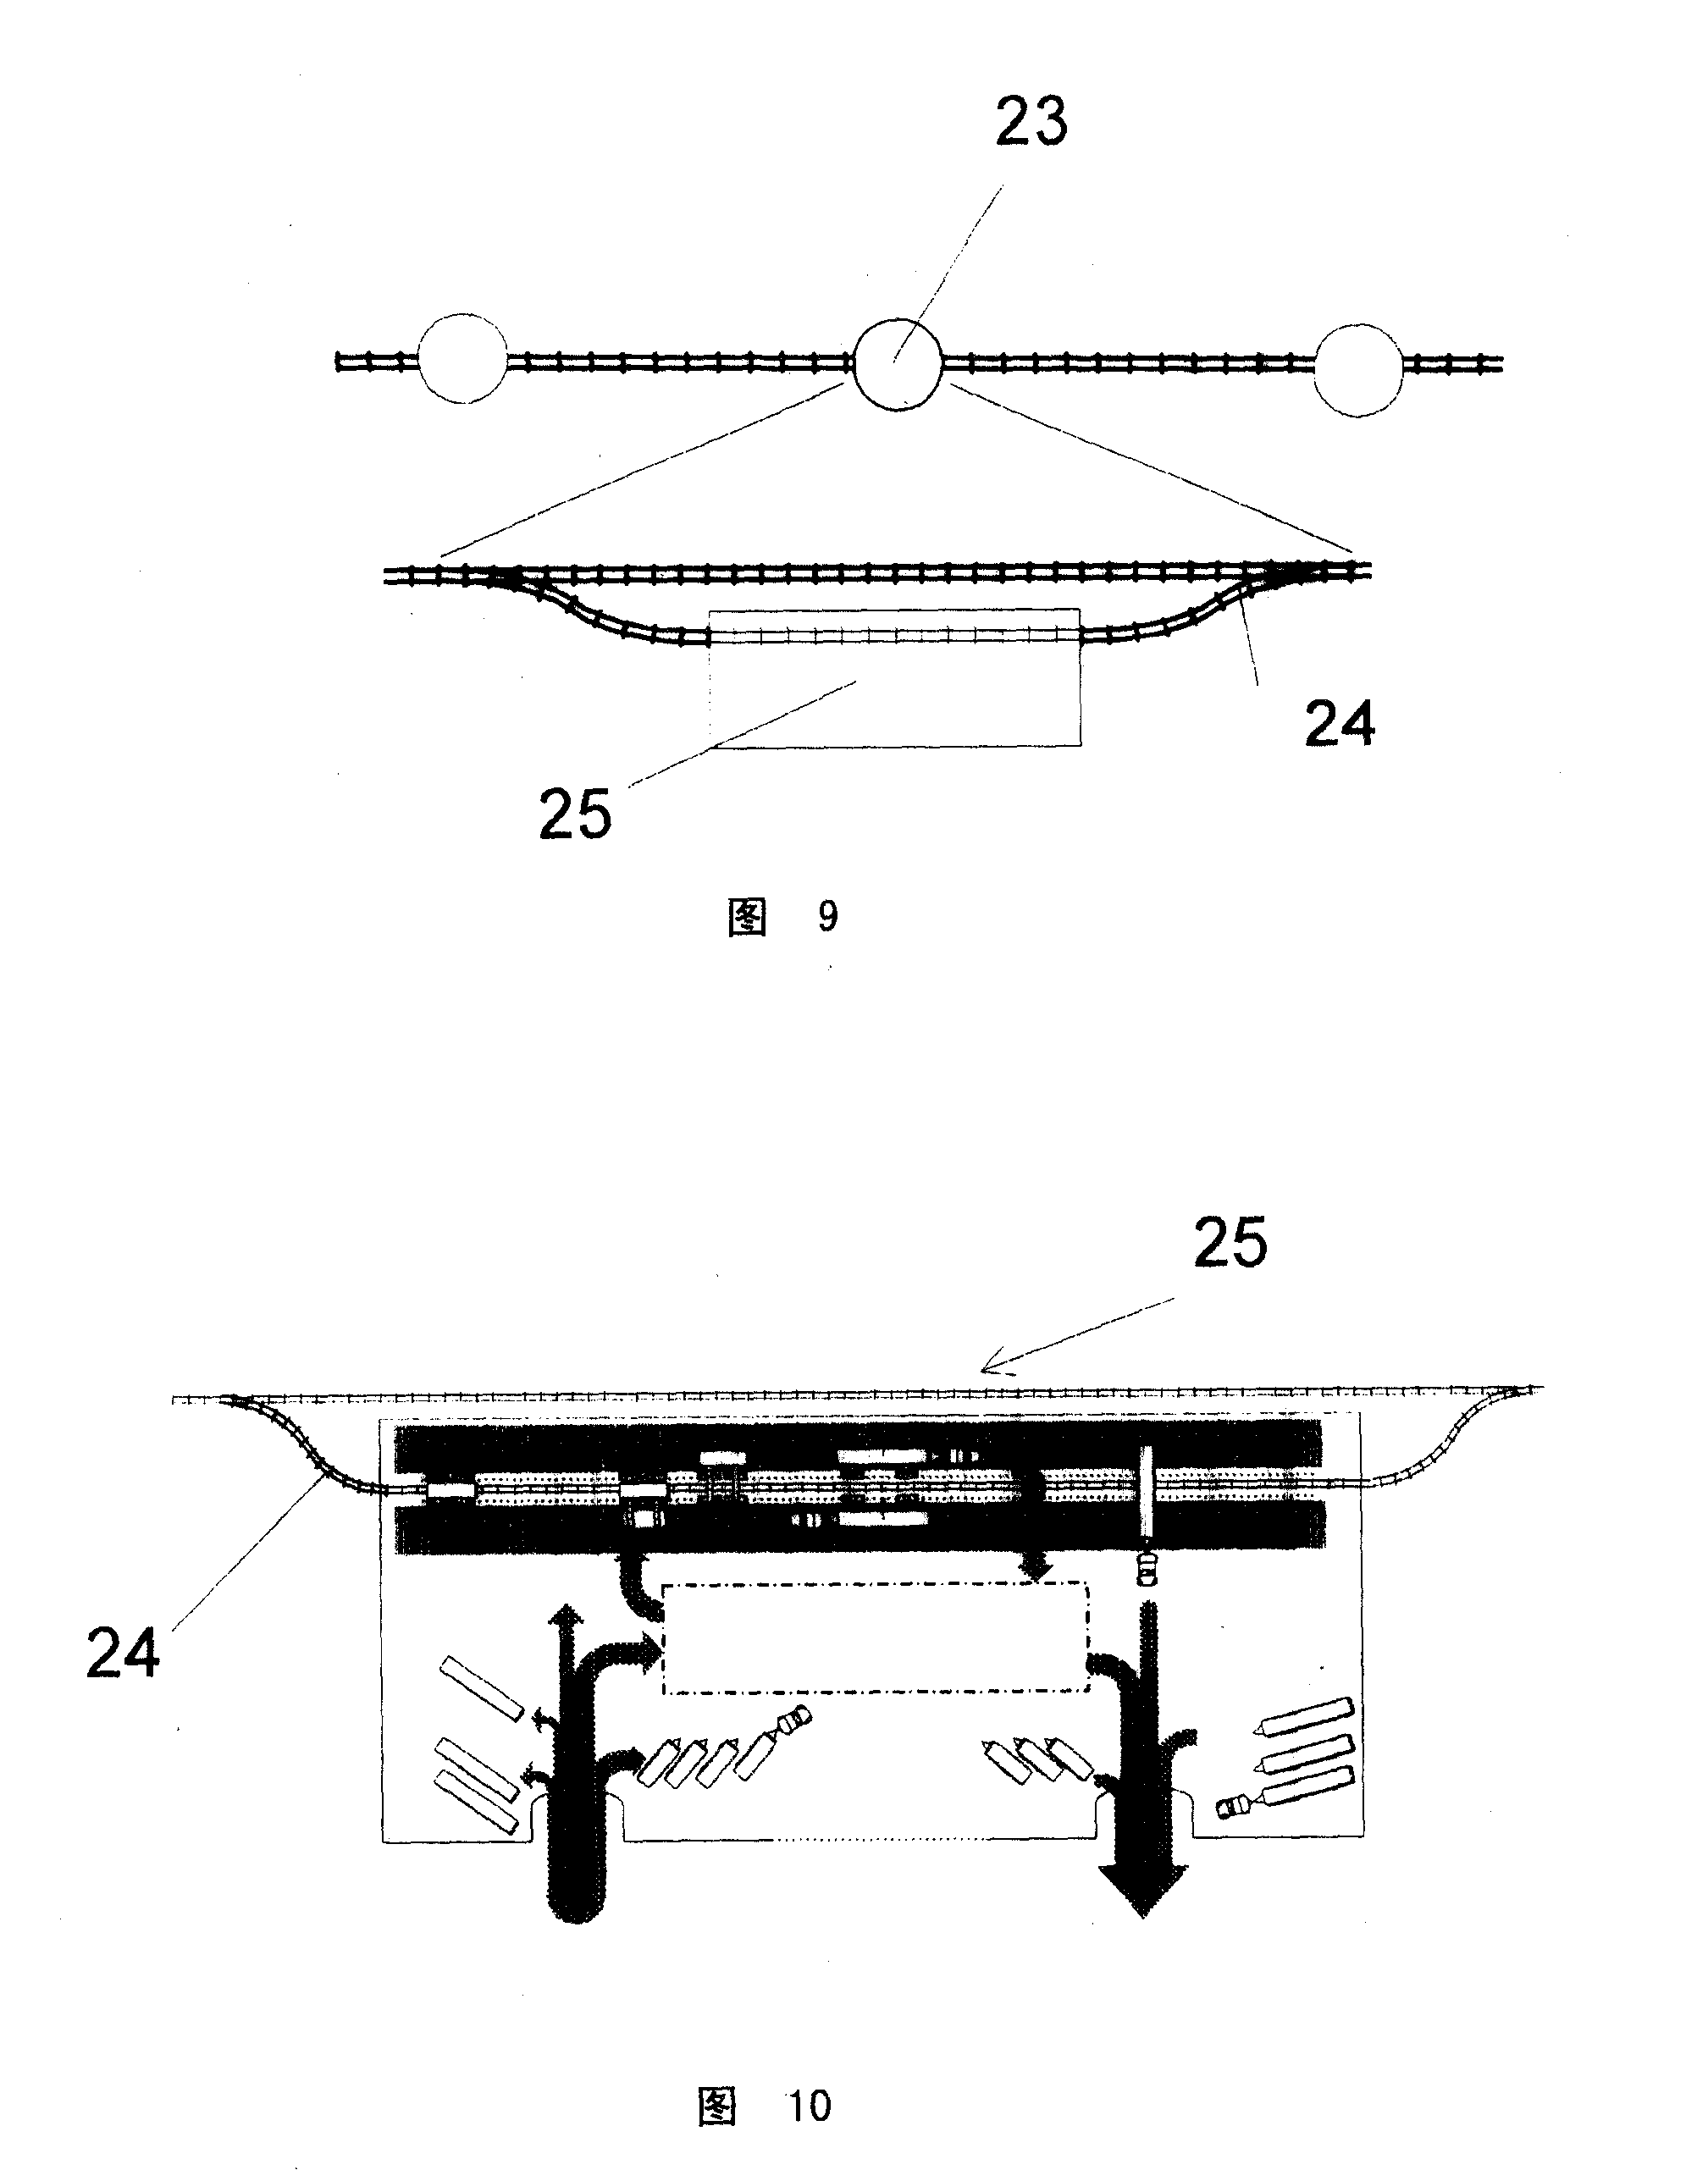 Method and reloading system for reloading or loading at least one loading unit